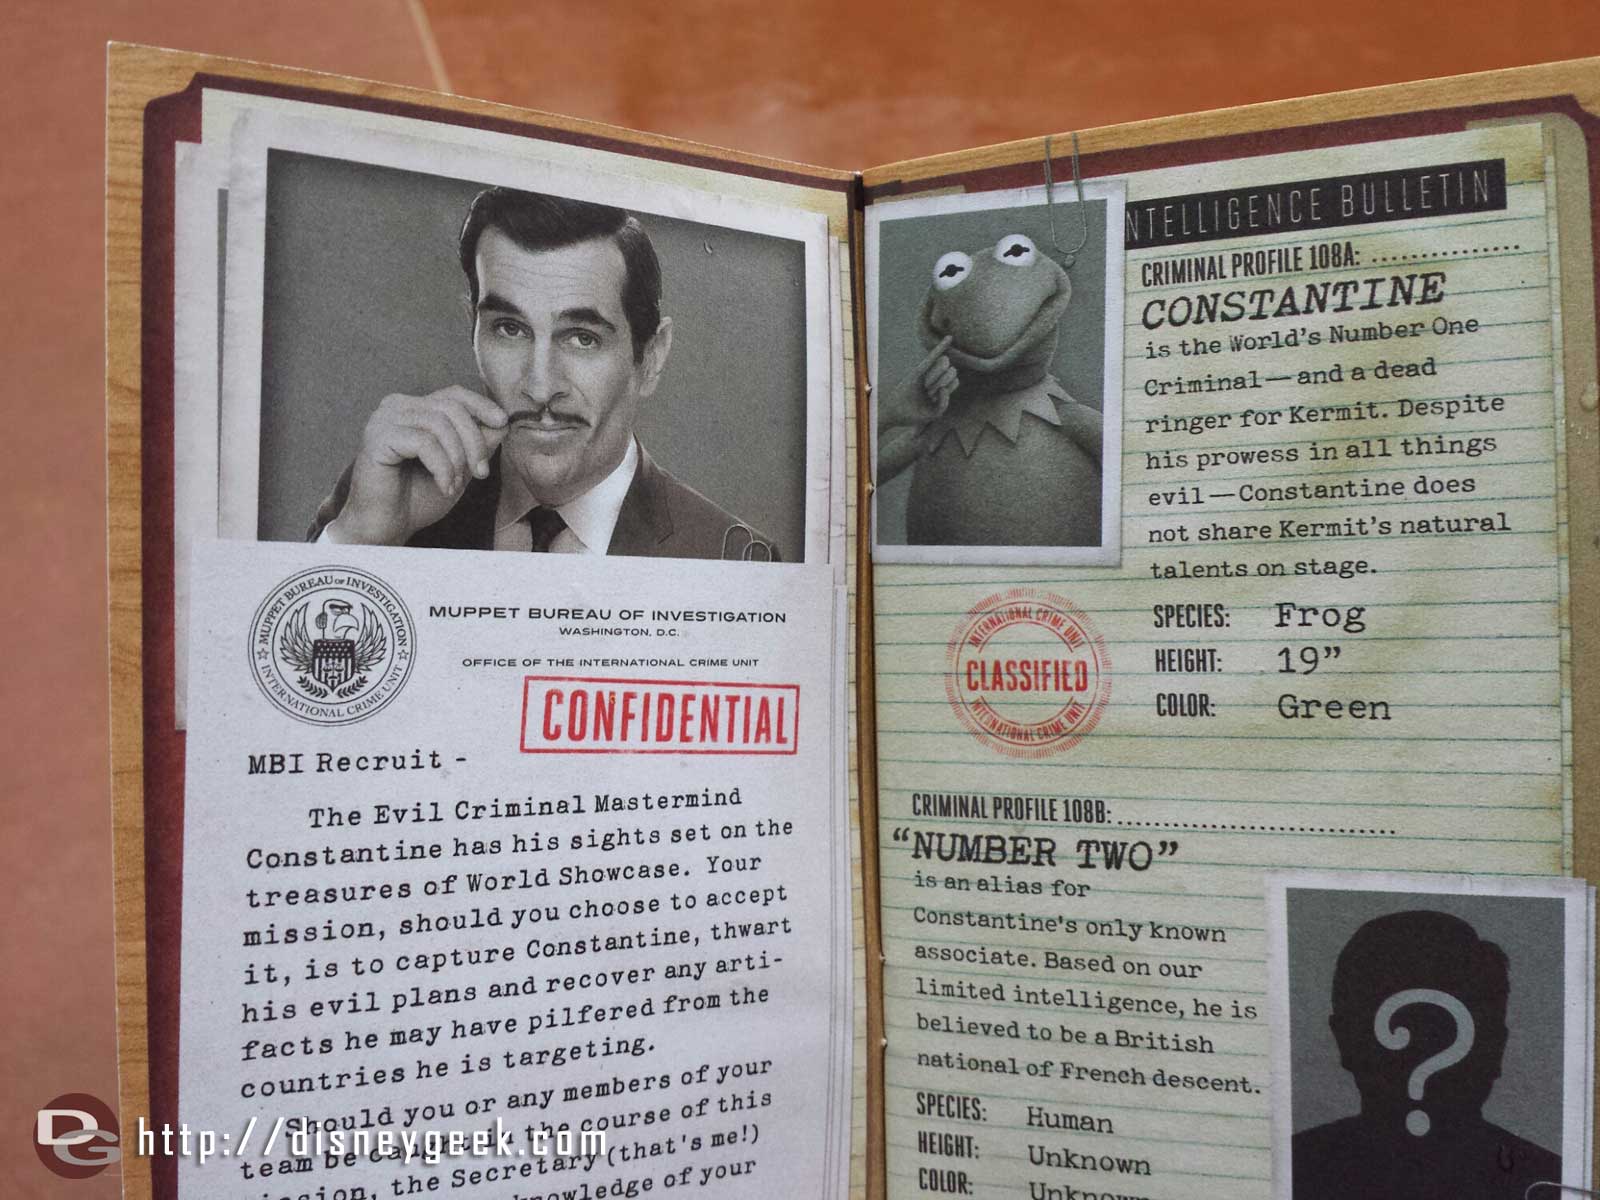 A look inside the booklet of the MIB (more pics in the full update)